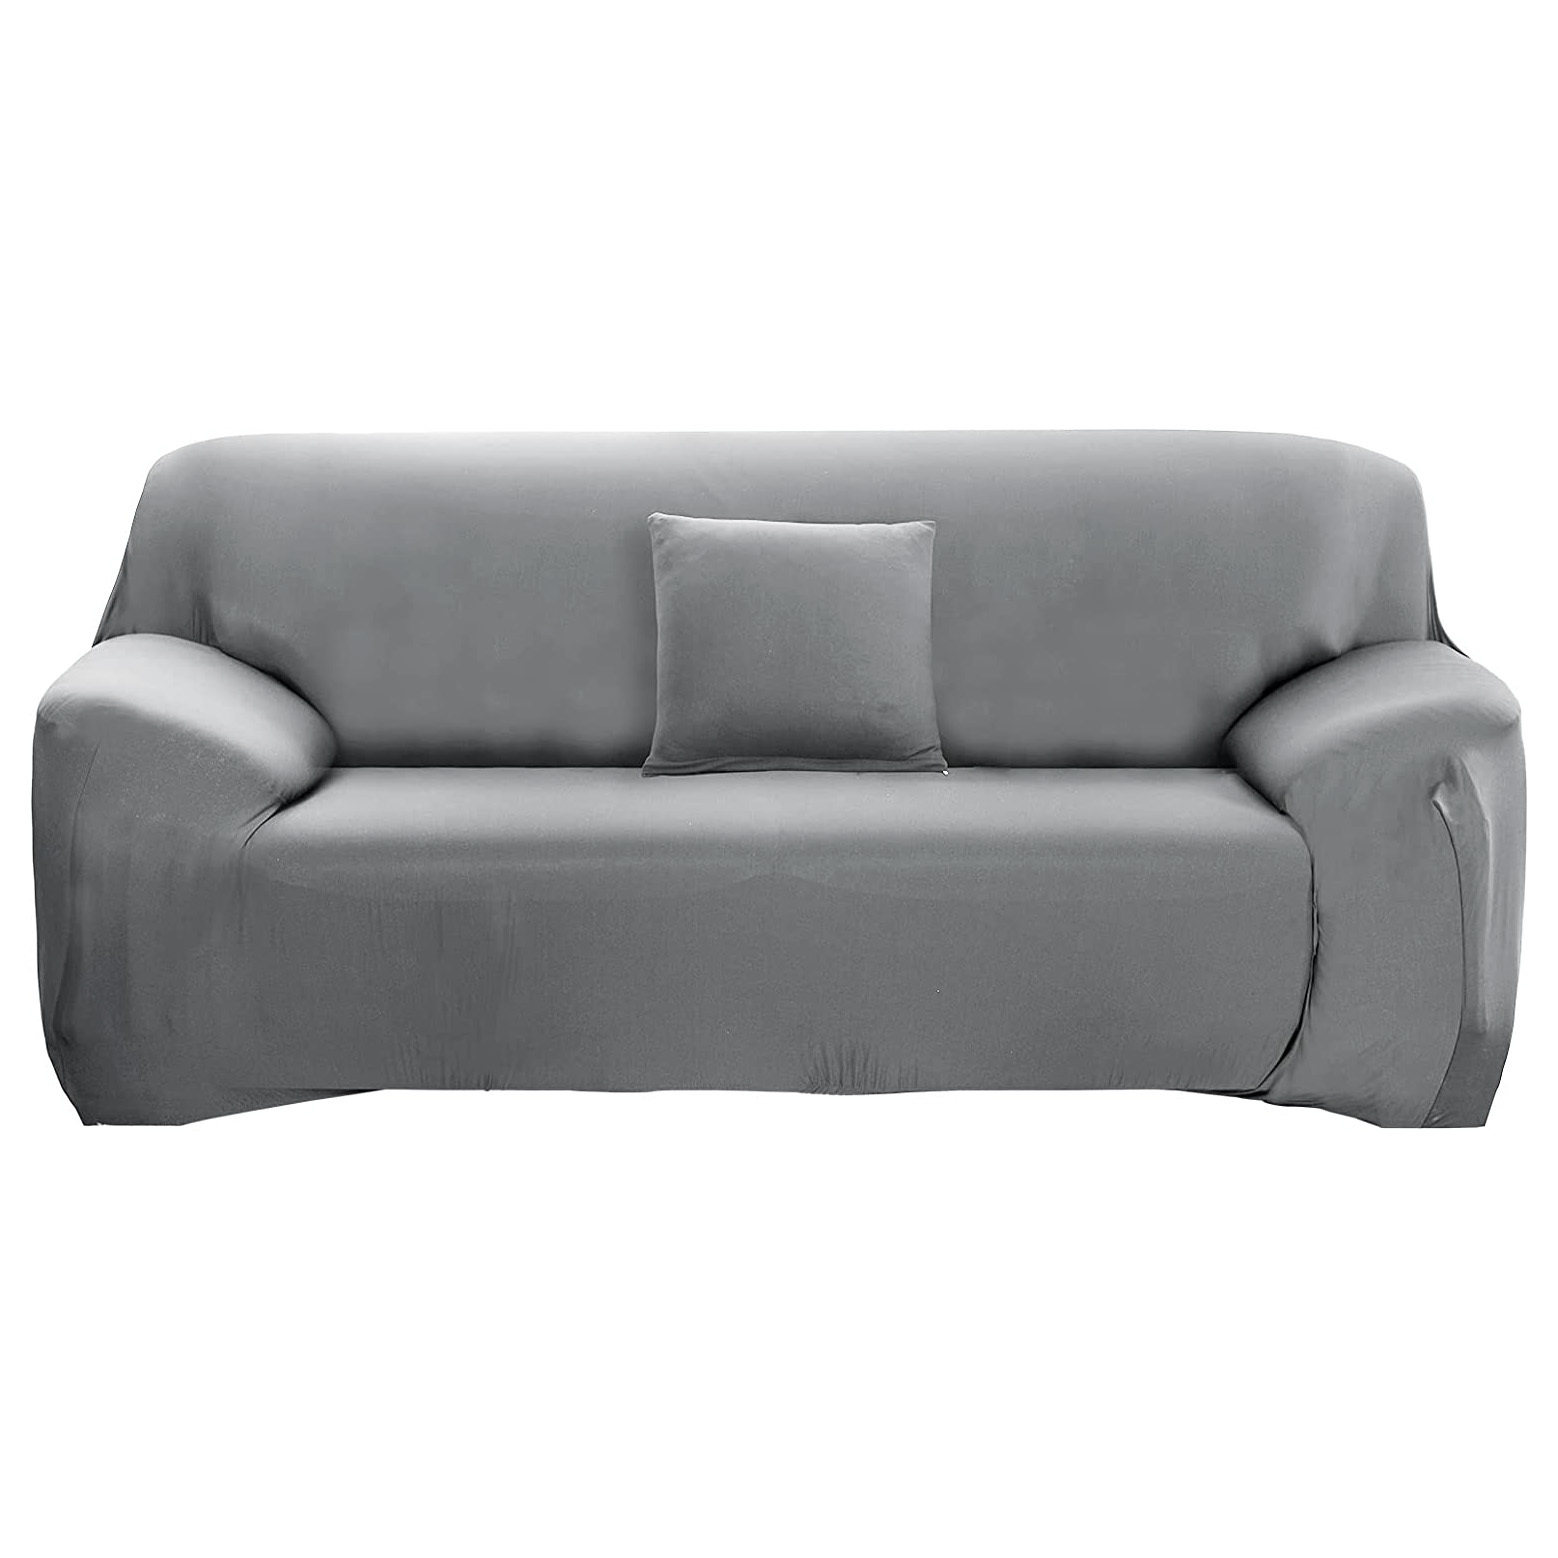 2-Seater Sofa Cover Stretch Set: Lounge Couch & Cushion Protector (Grey)